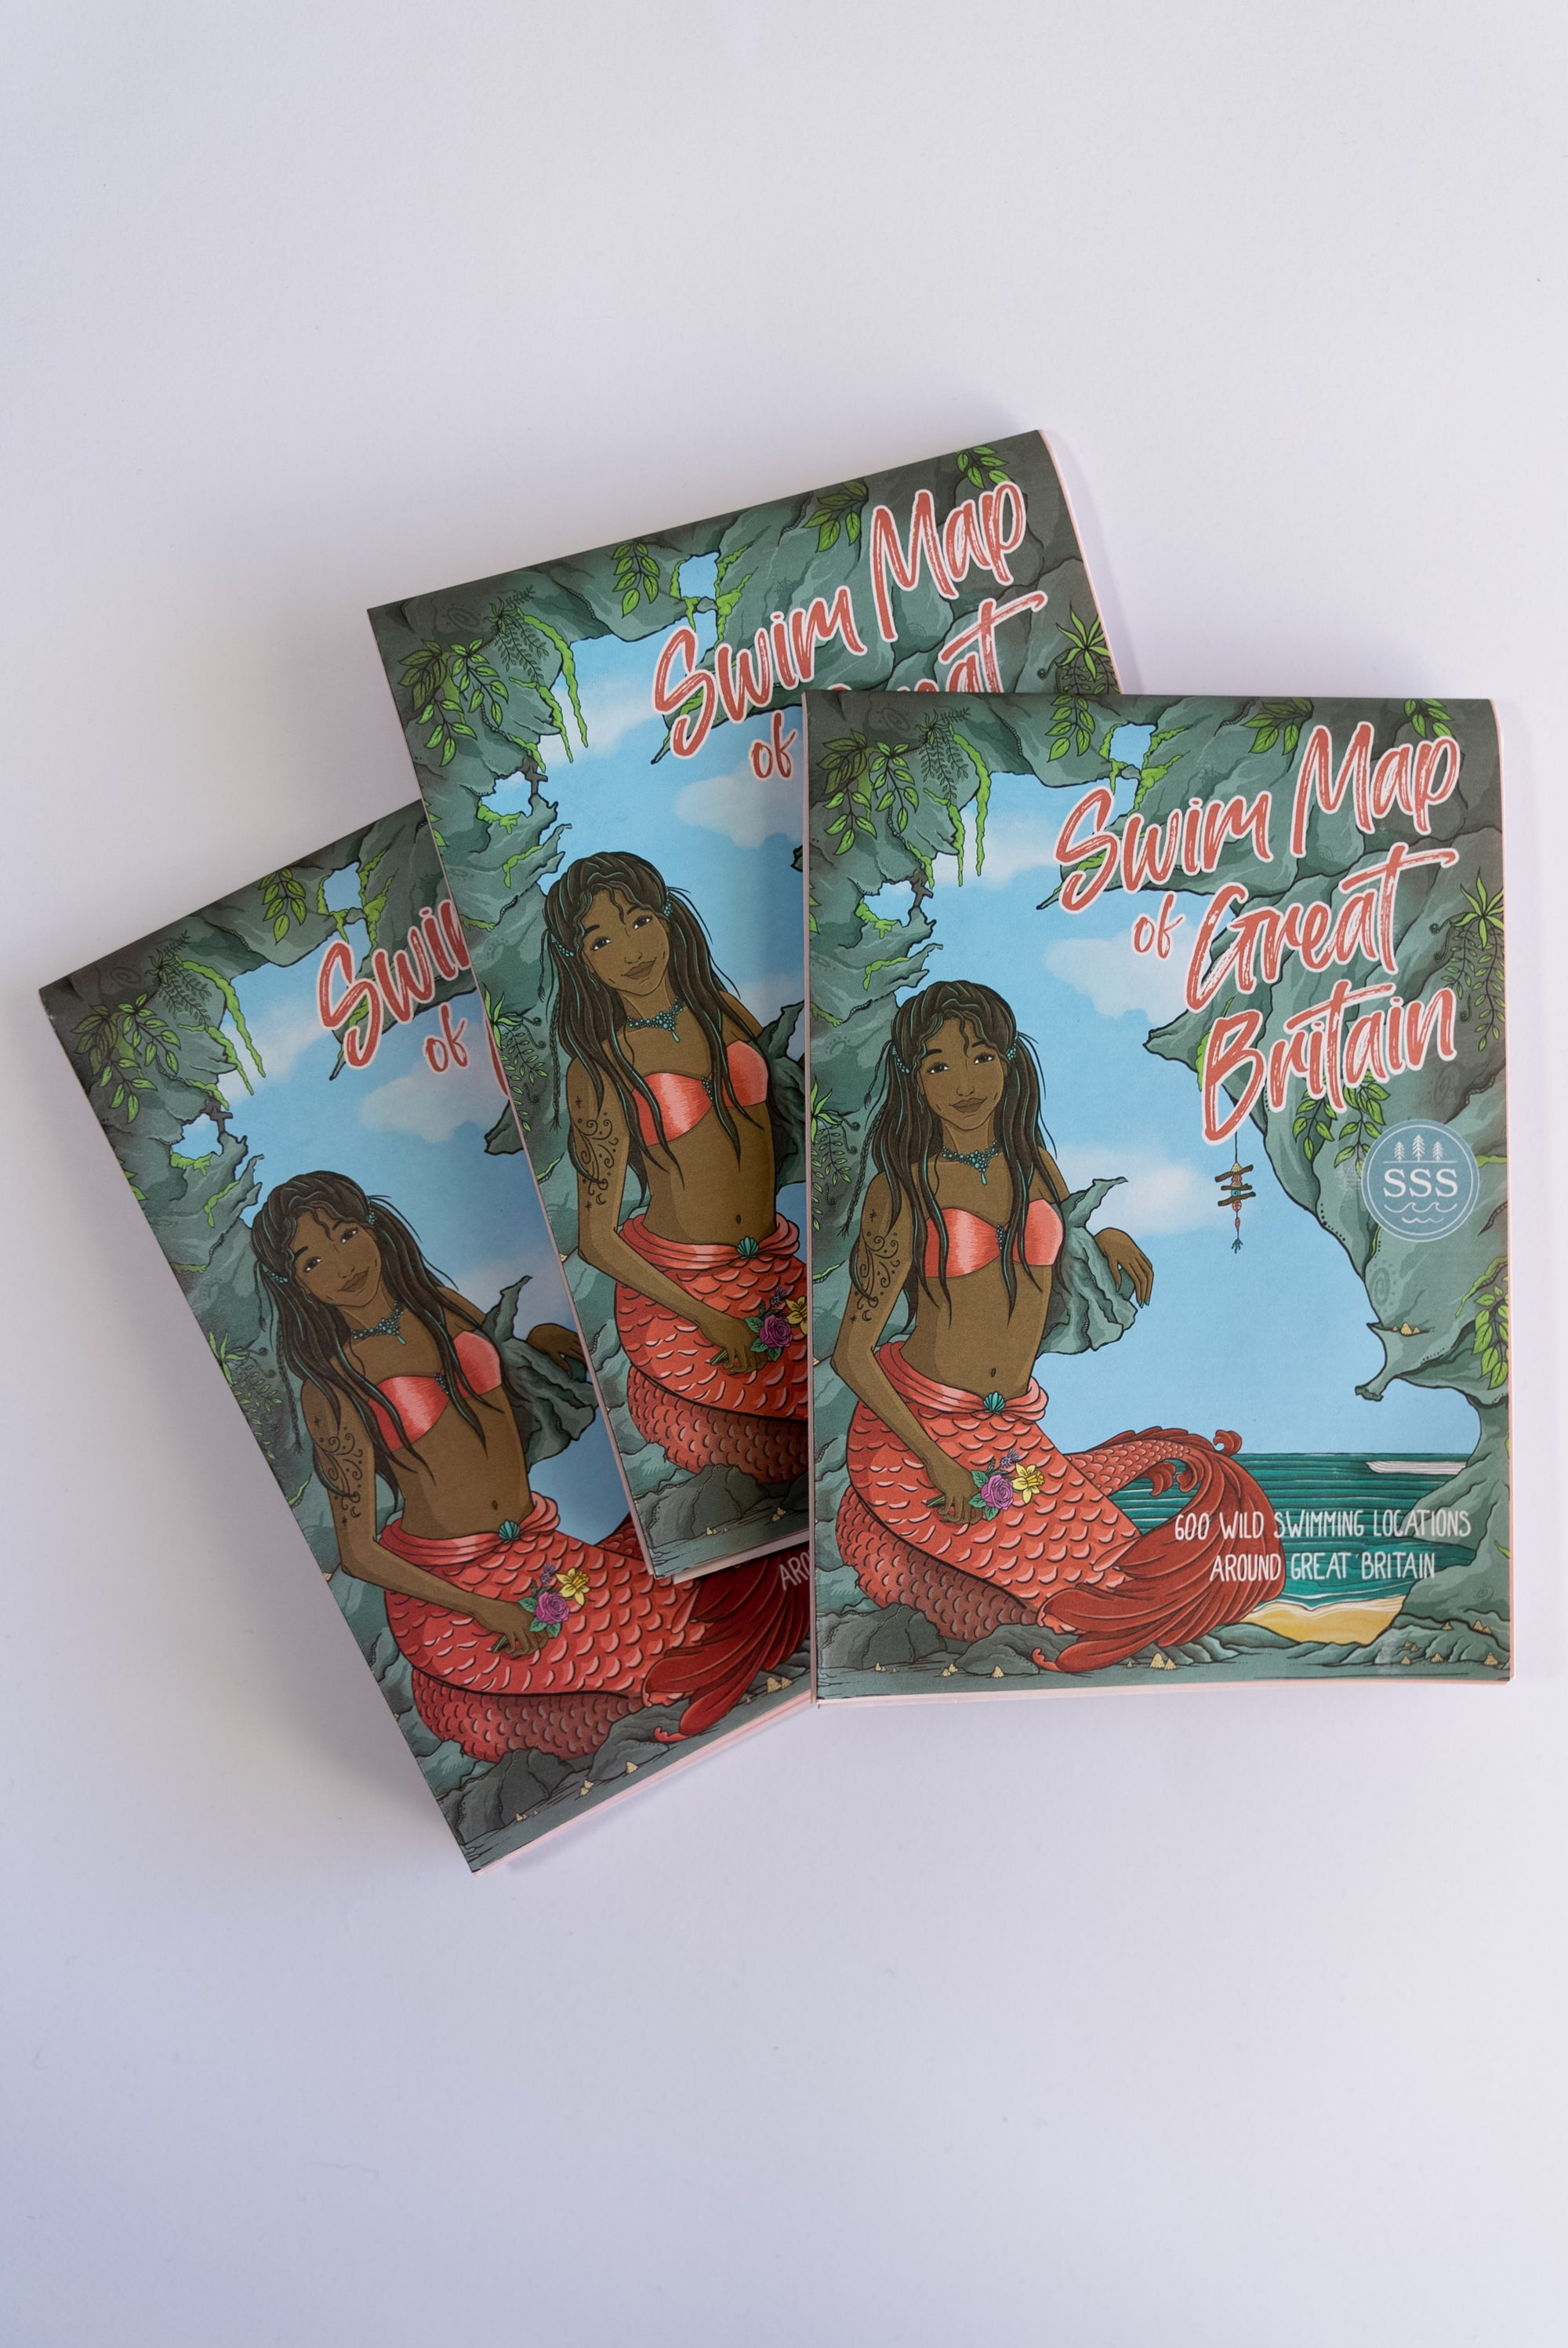 Three front covers of a swim map of Great Britain showing a mermaid at the entrance to a cave. The mermaid has long dark brown hair, black skin colour and a red tail.